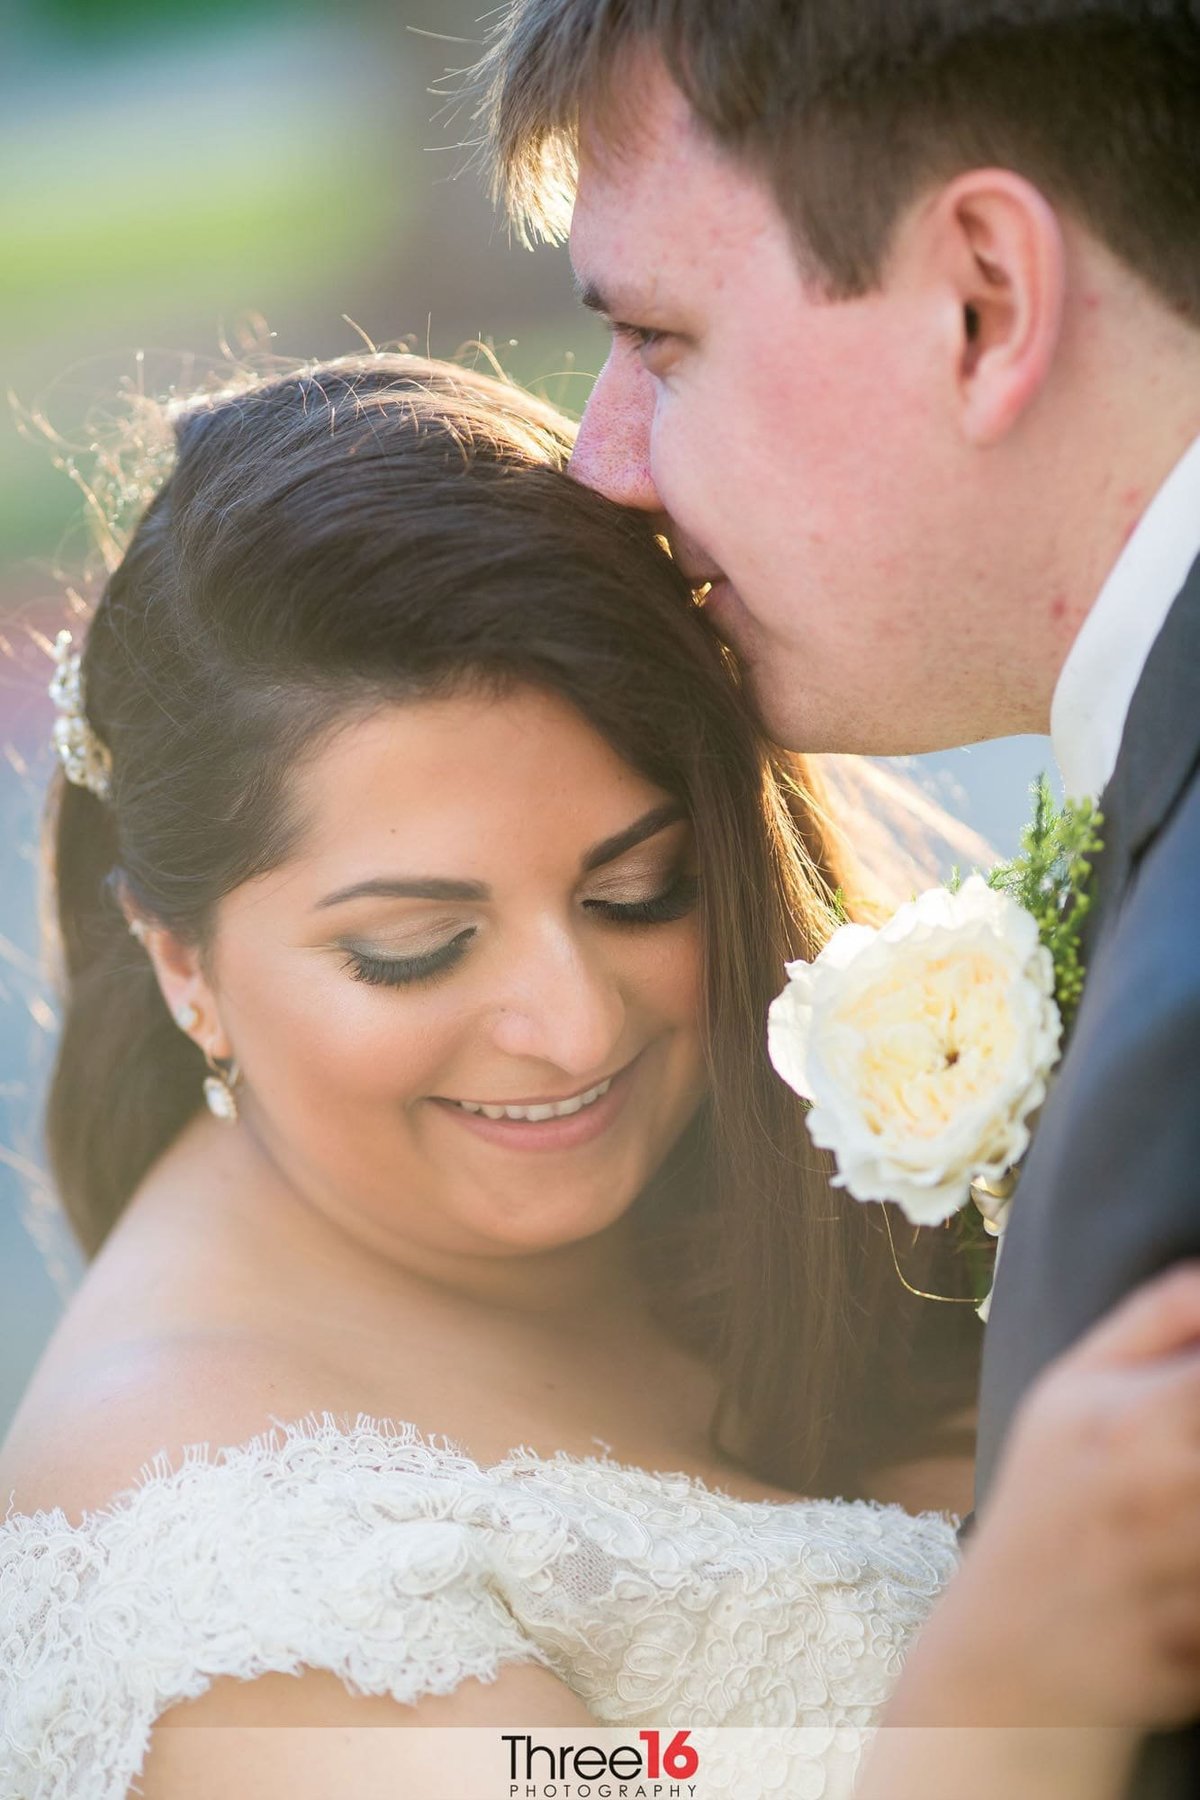 Groom kisses his Bride's head in a tender moment